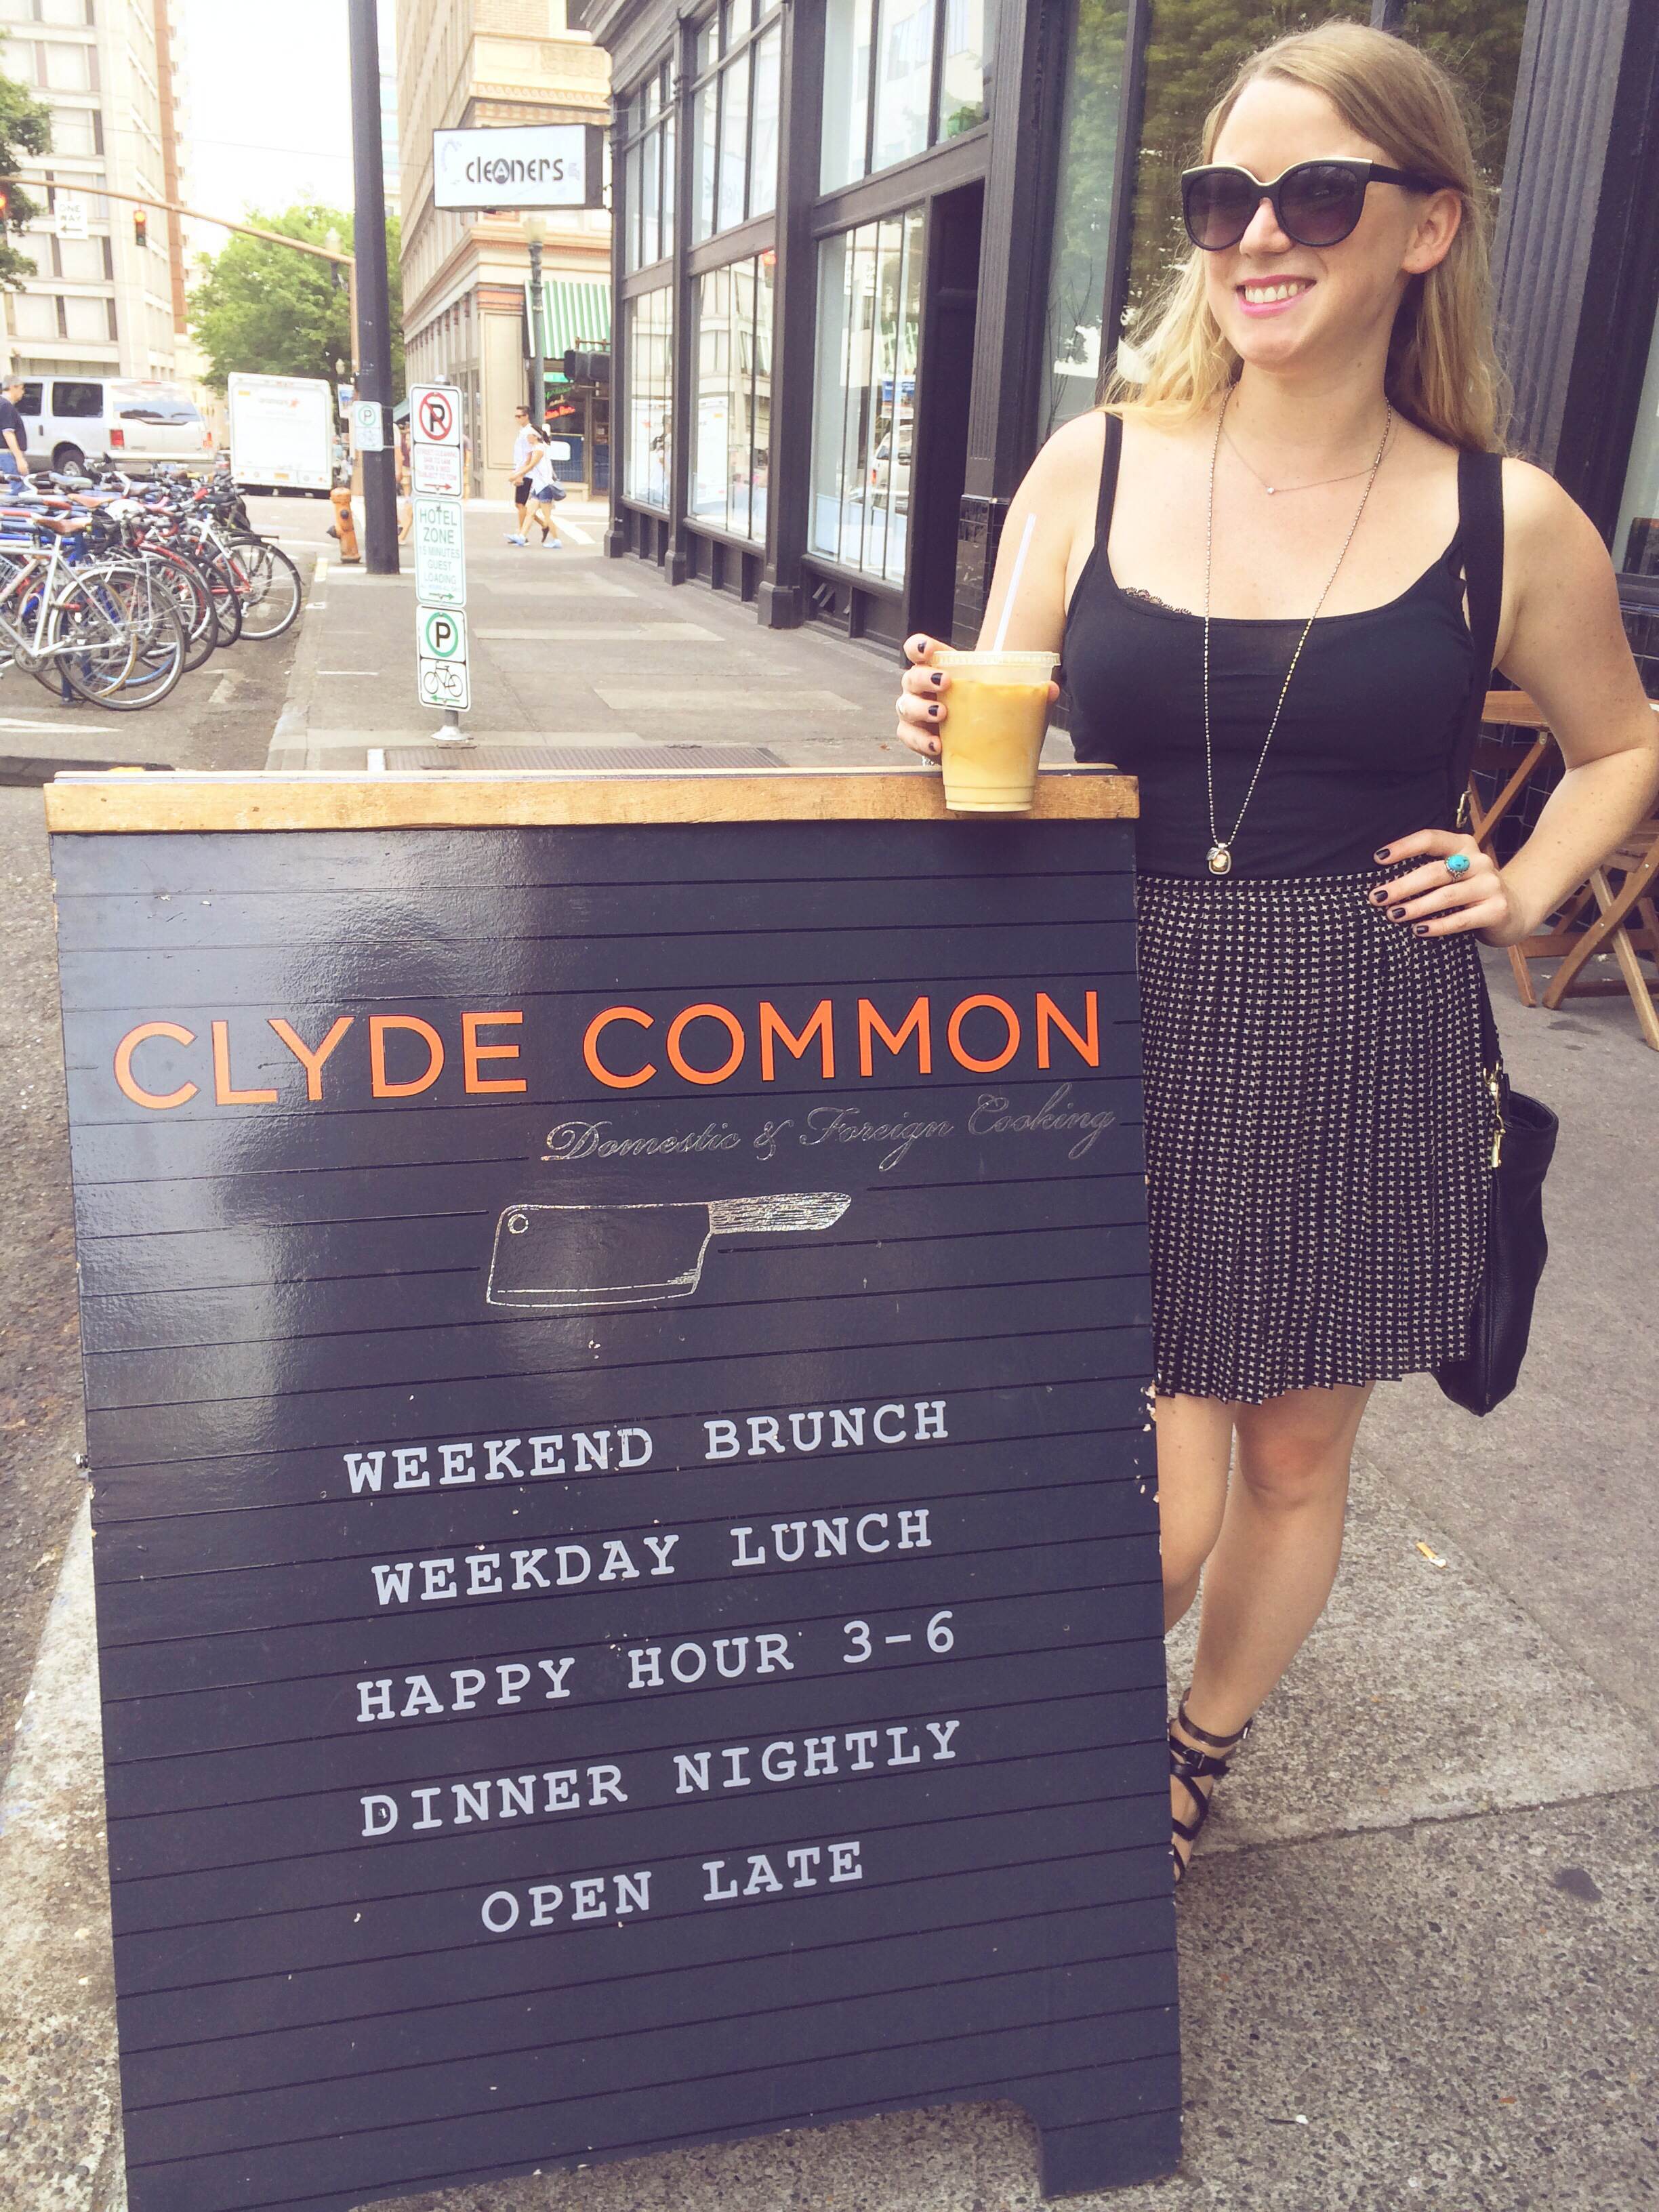 Brunch at Clyde Common